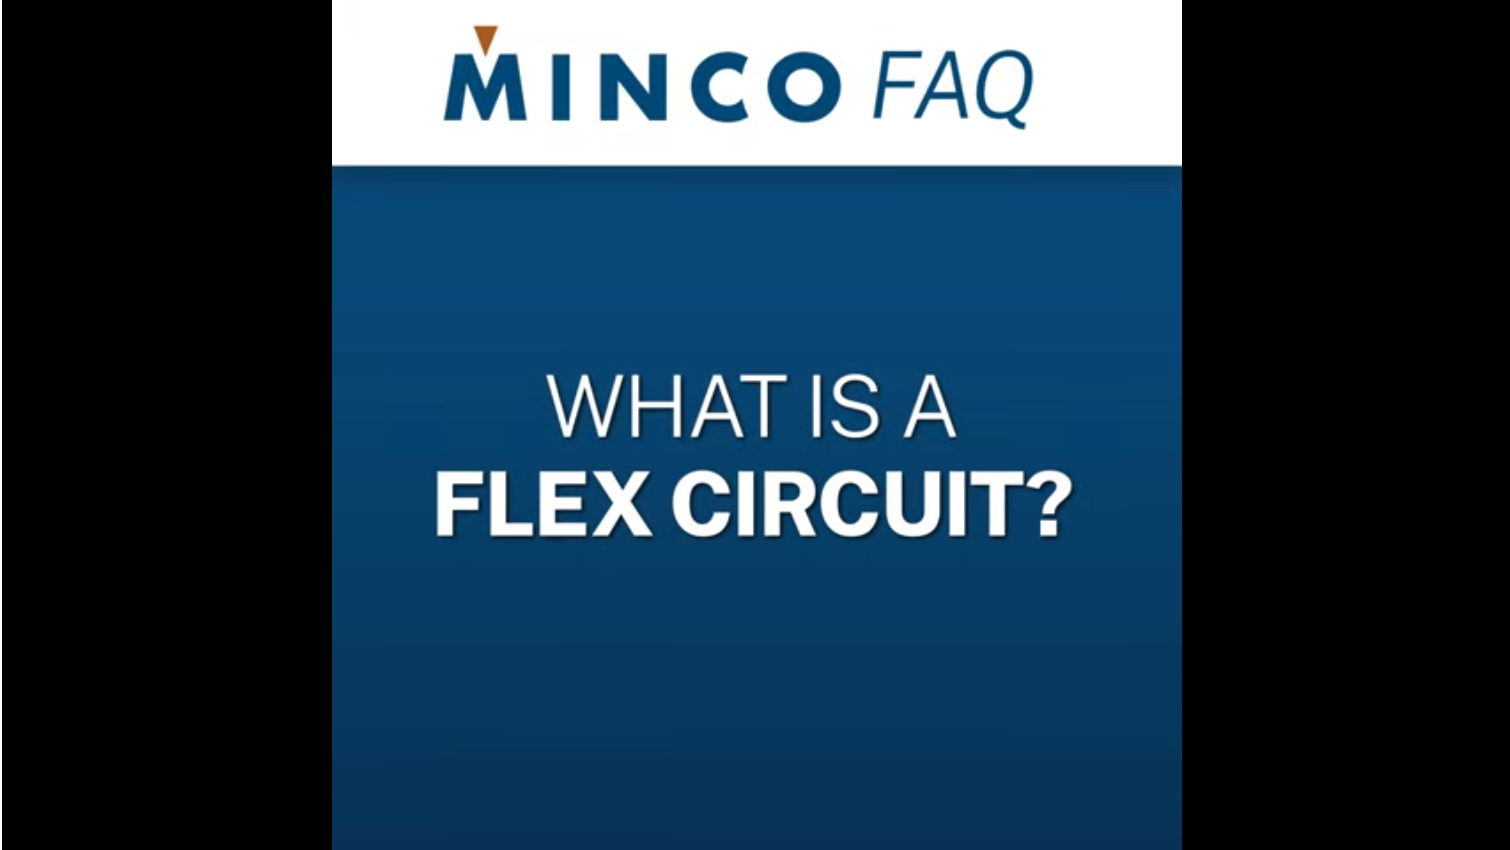 What is a flex circuit